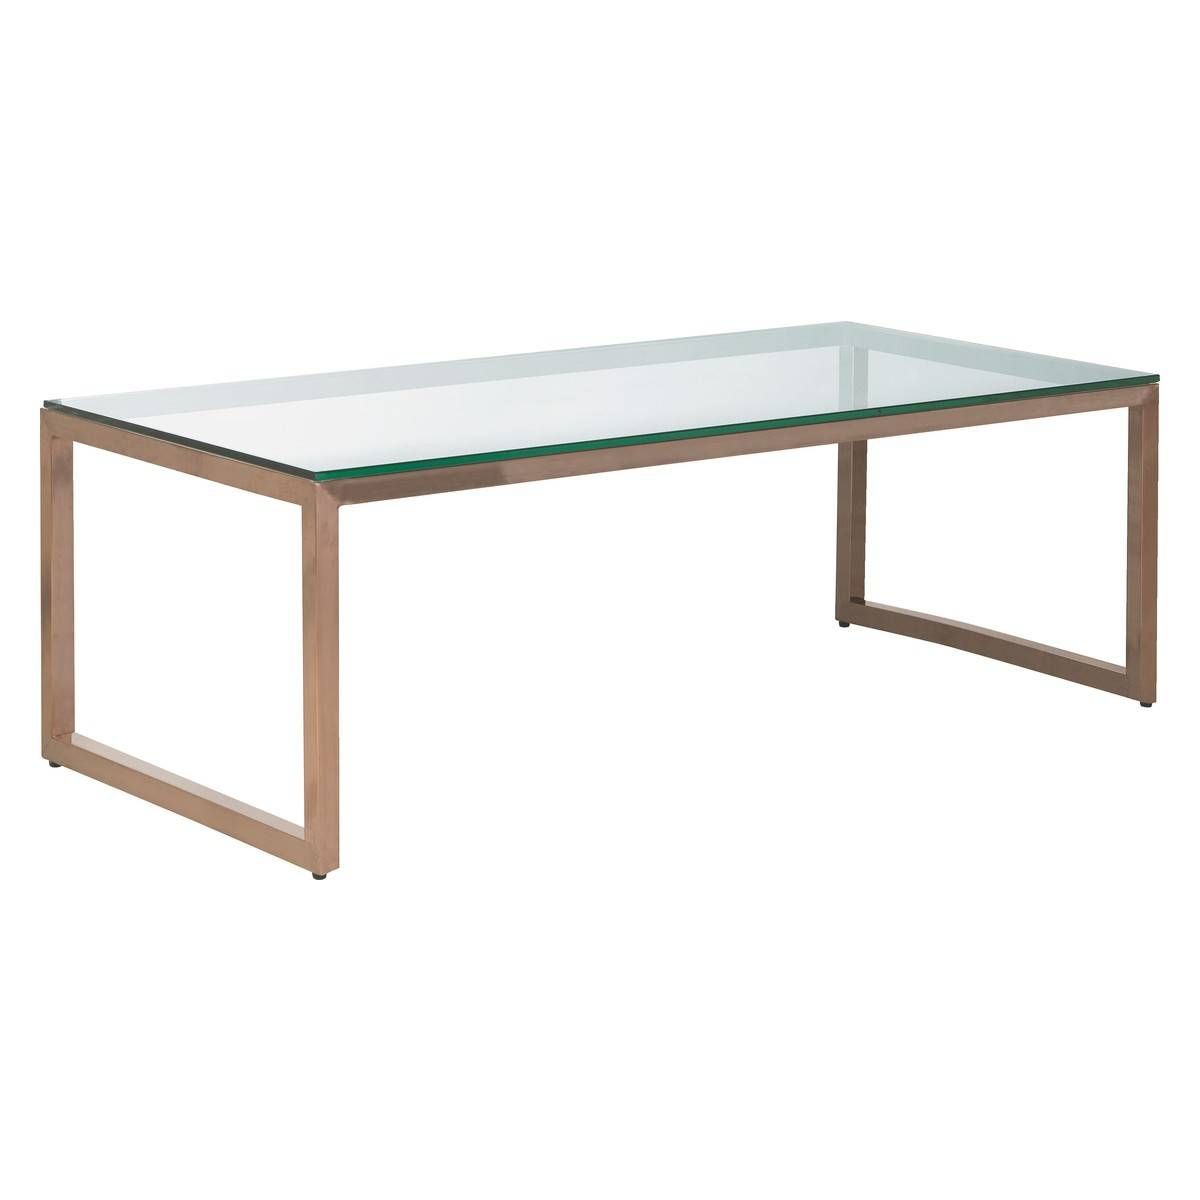 Coffee Table: New Coffee Table Glass Designs Glass Coffee Tables With Regard To Glass Coffee Tables (View 7 of 24)